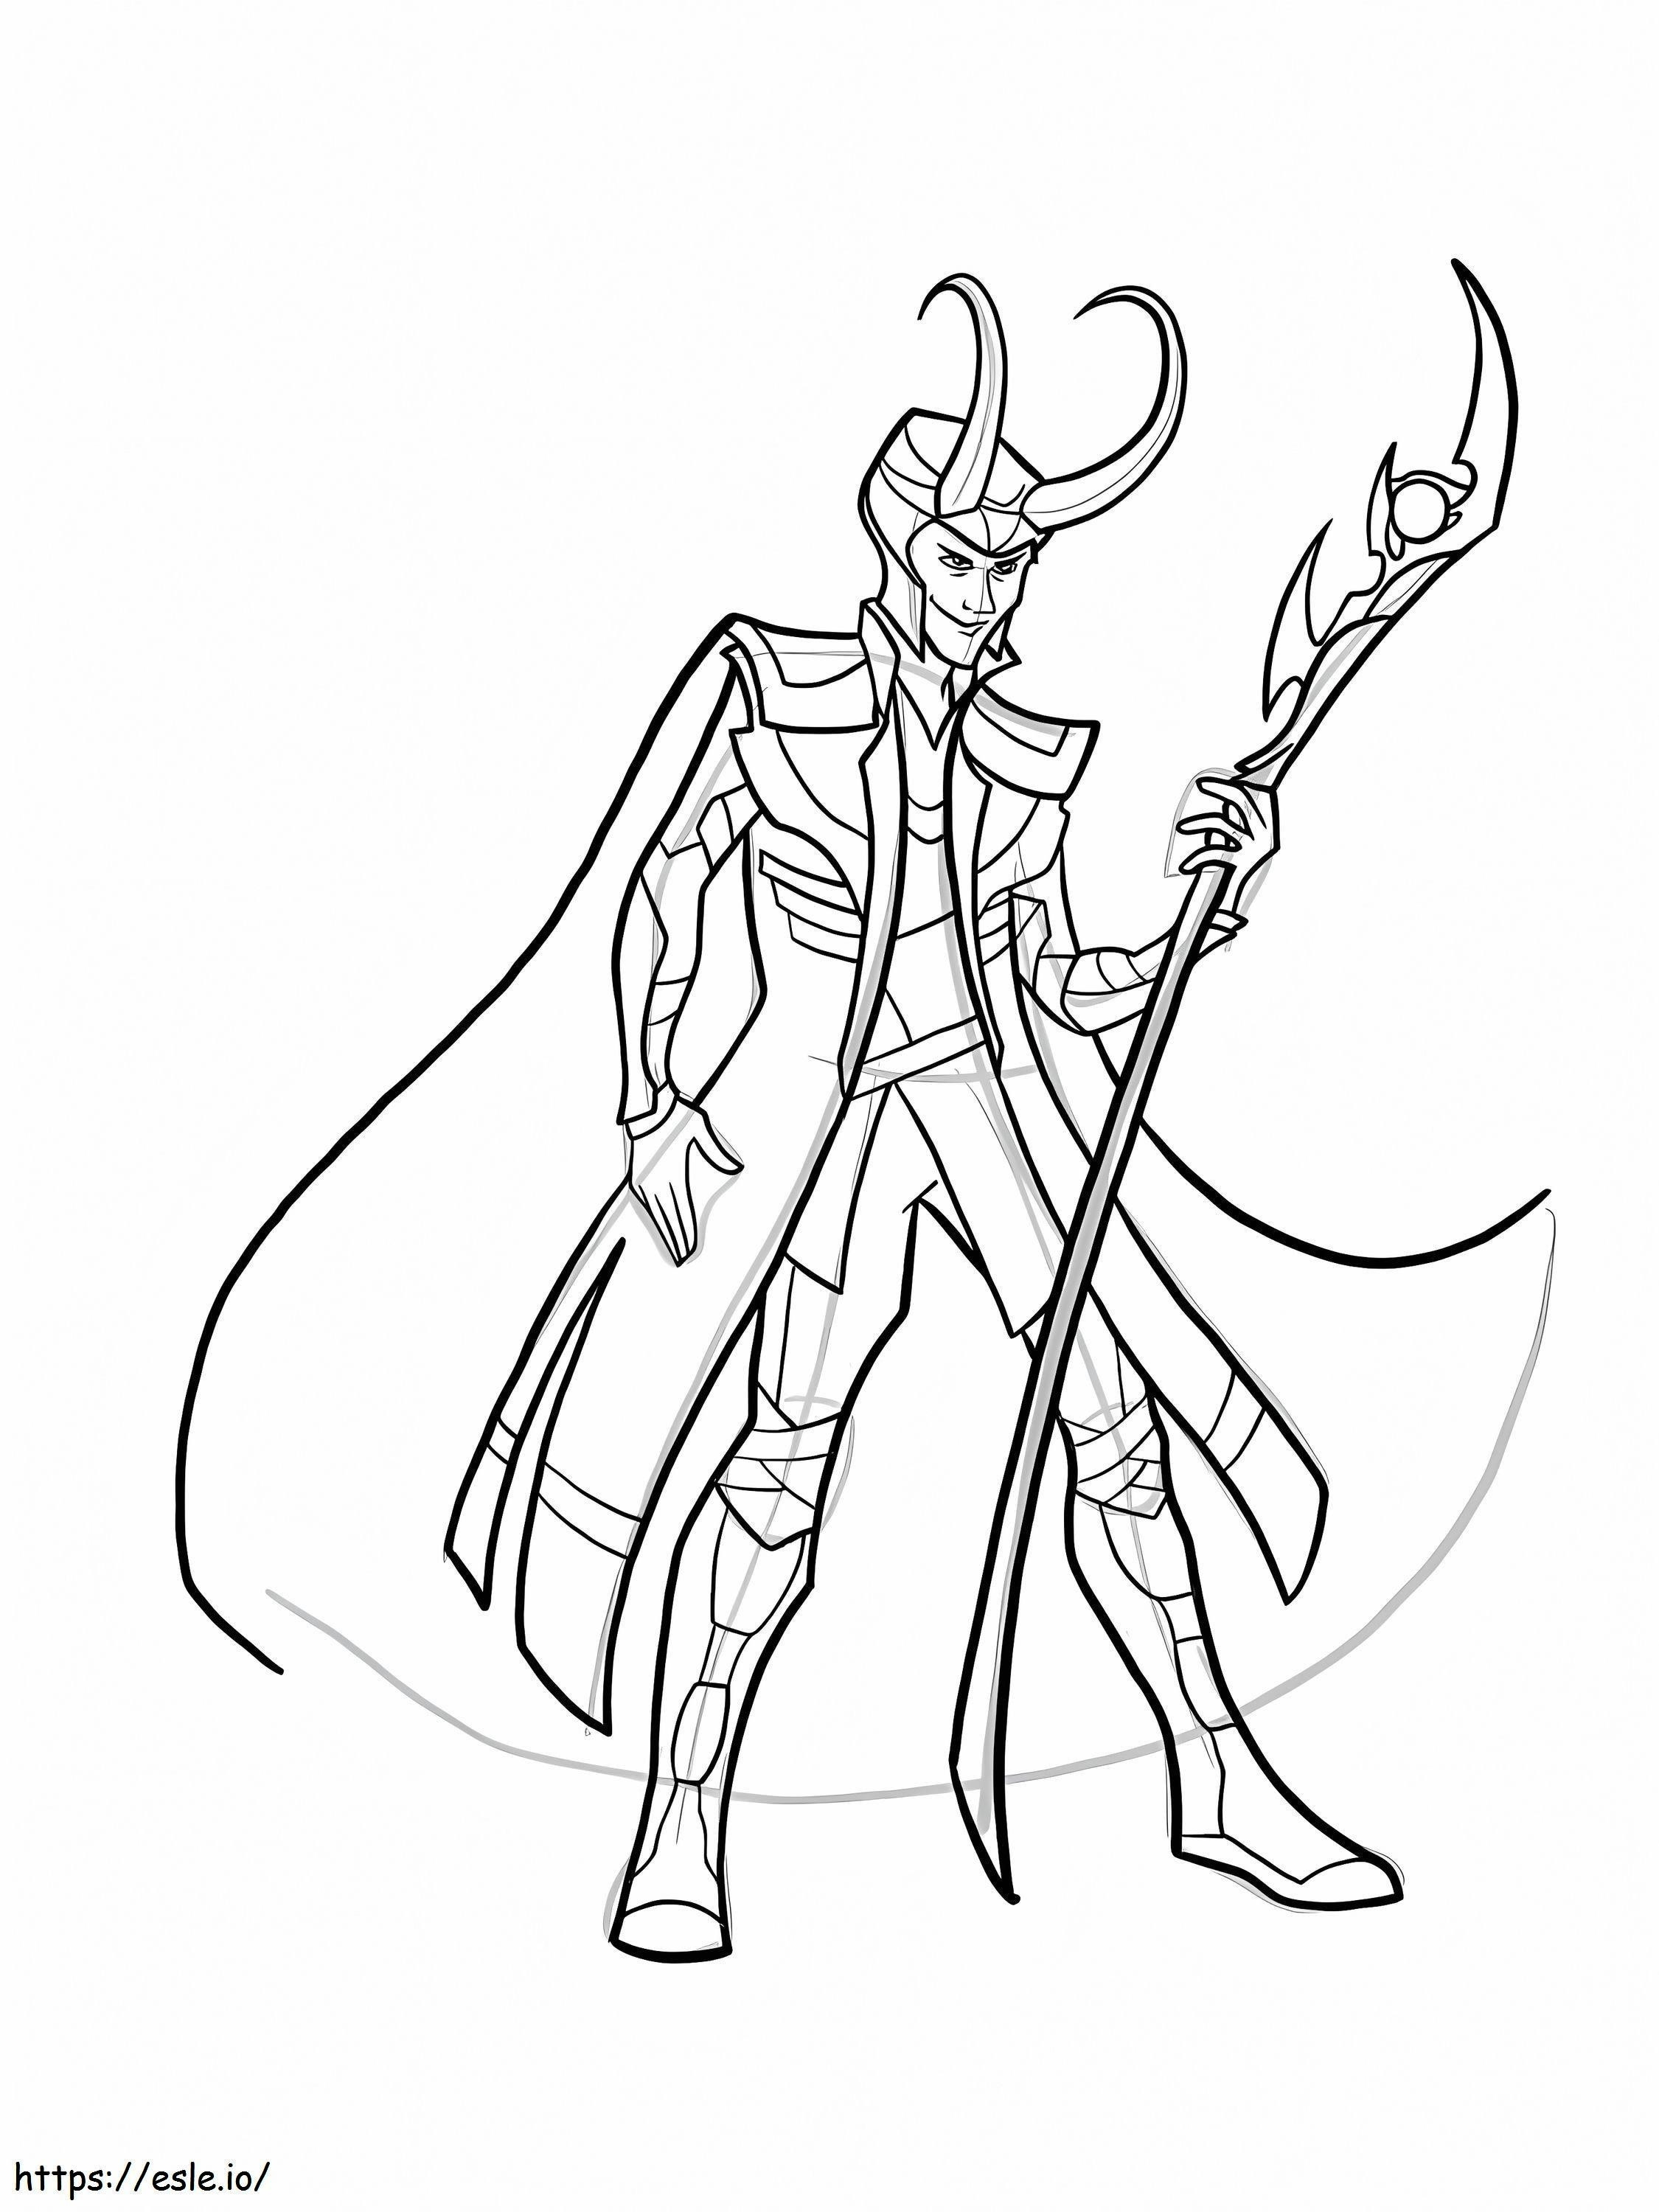 Loki With Scepter coloring page